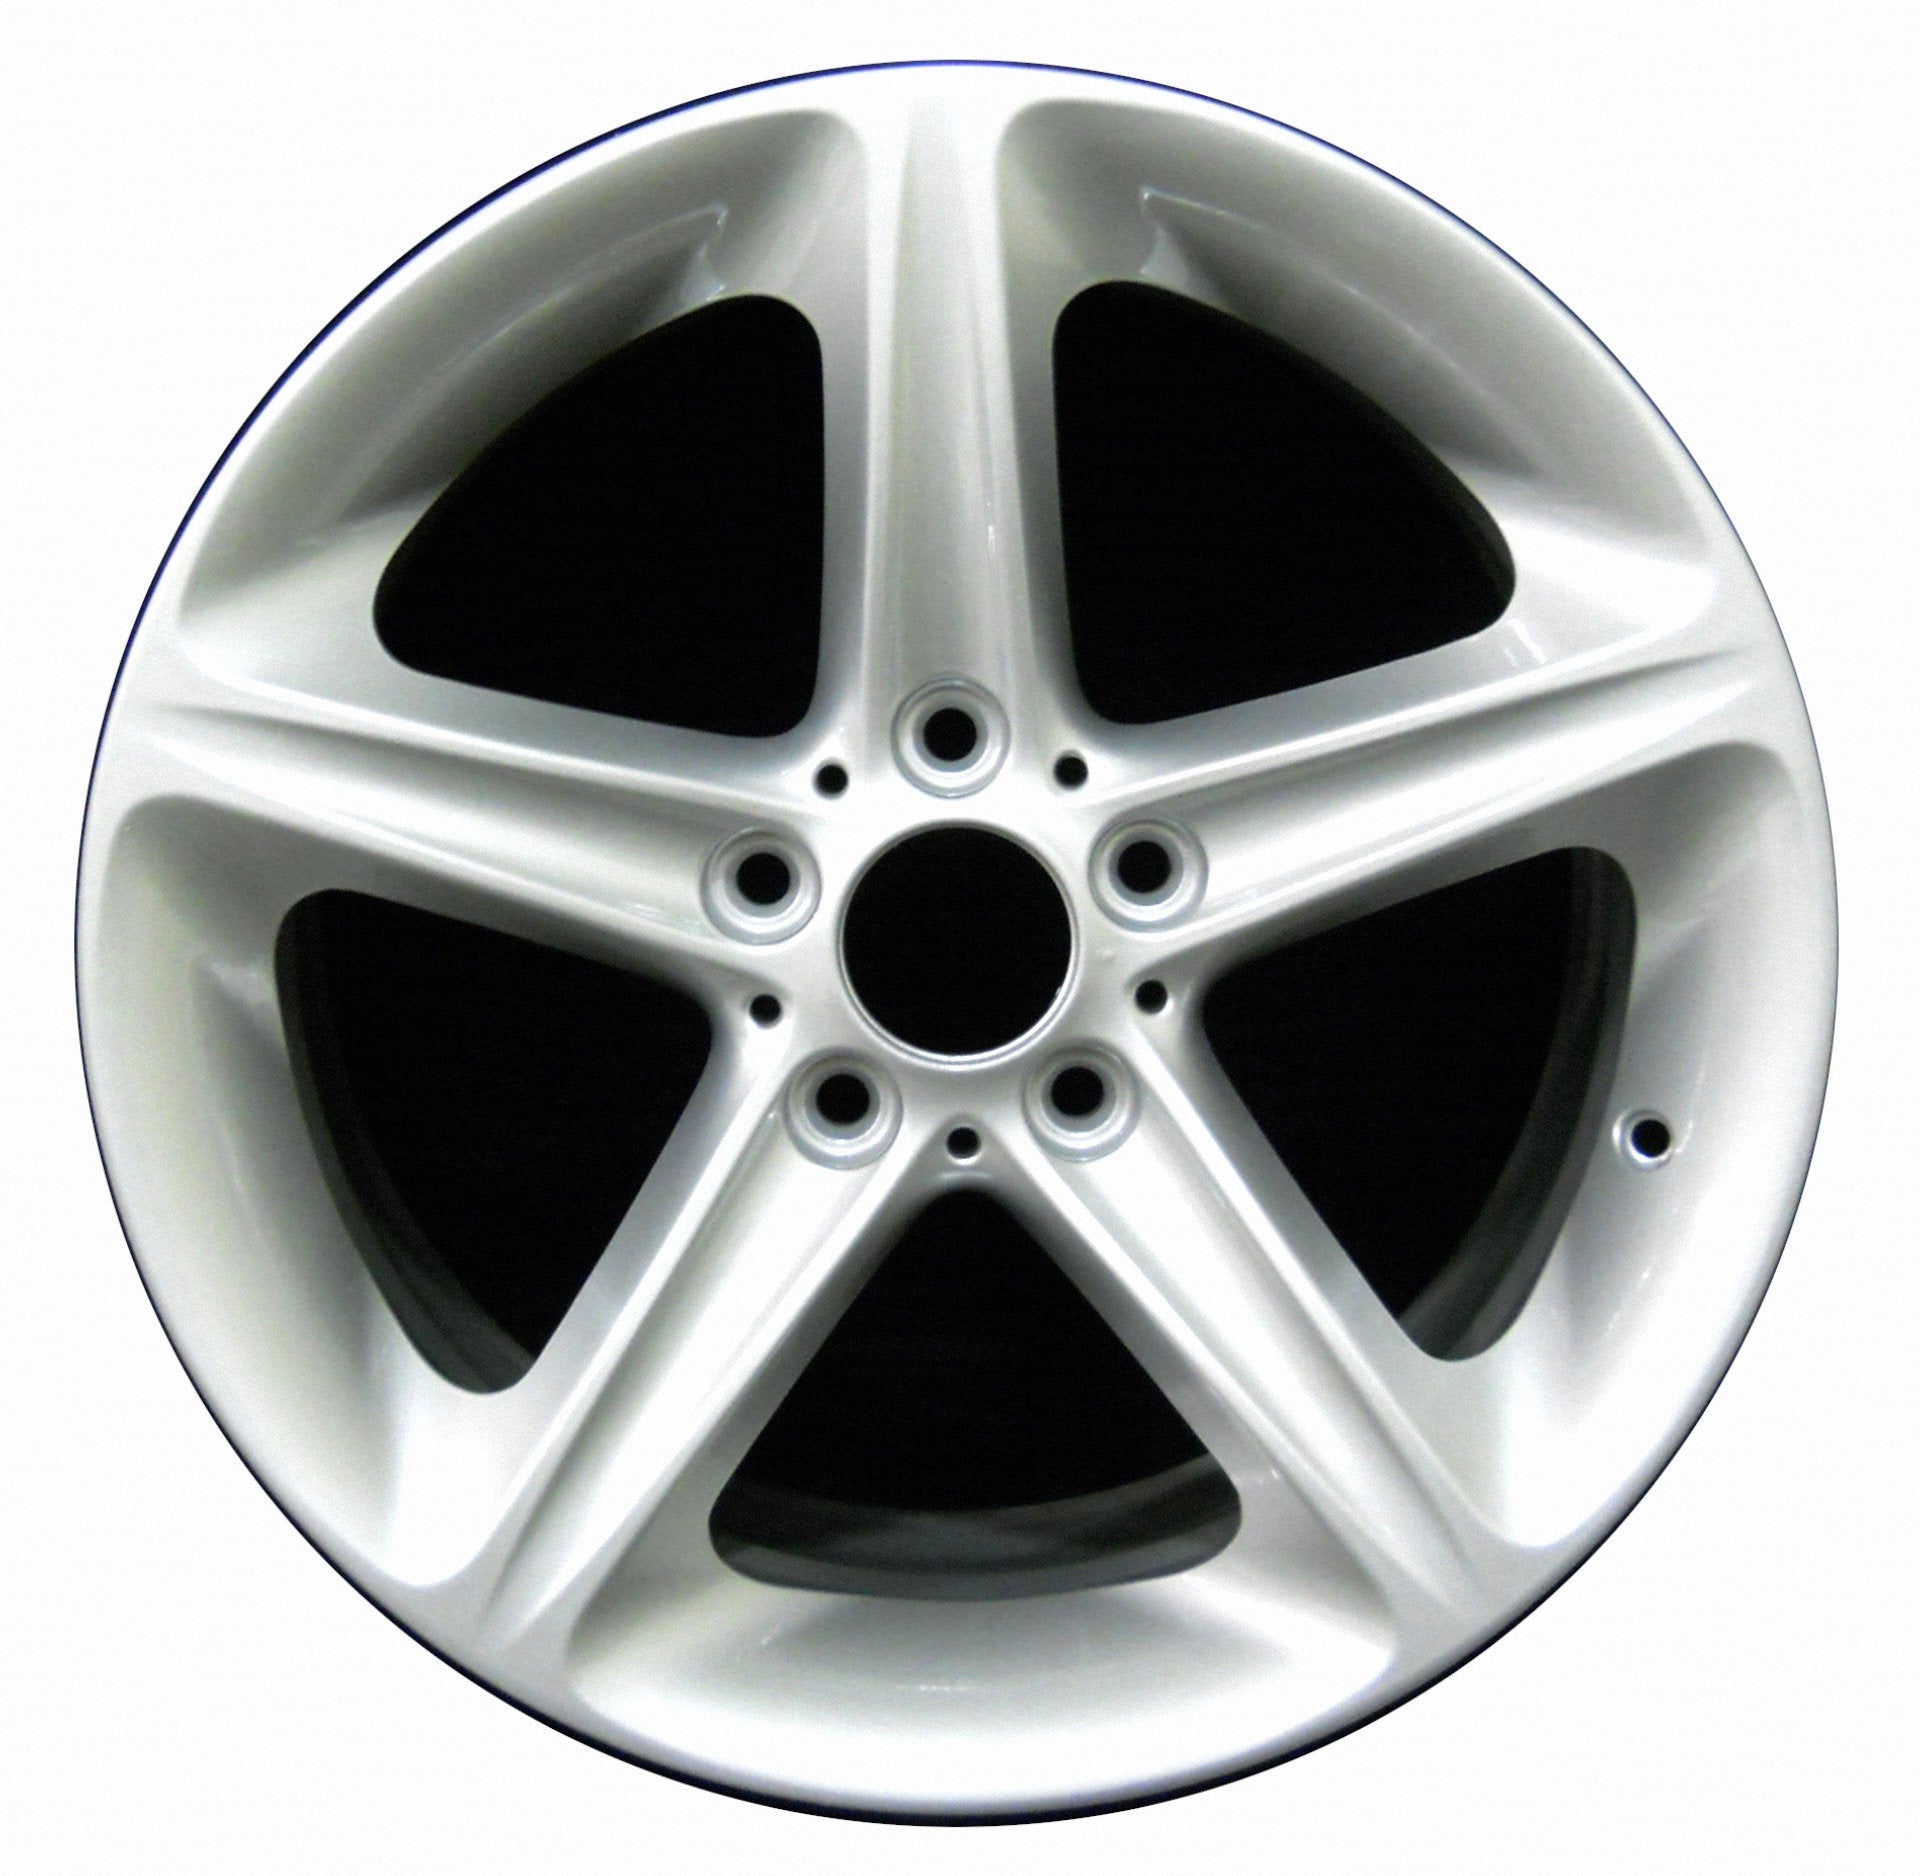 BMW 135i  2008, 2009, 2010, 2011, 2012, 2013 Factory OEM Car Wheel Size 18x7.5 Alloy WAO.71260FT.PS10.FF